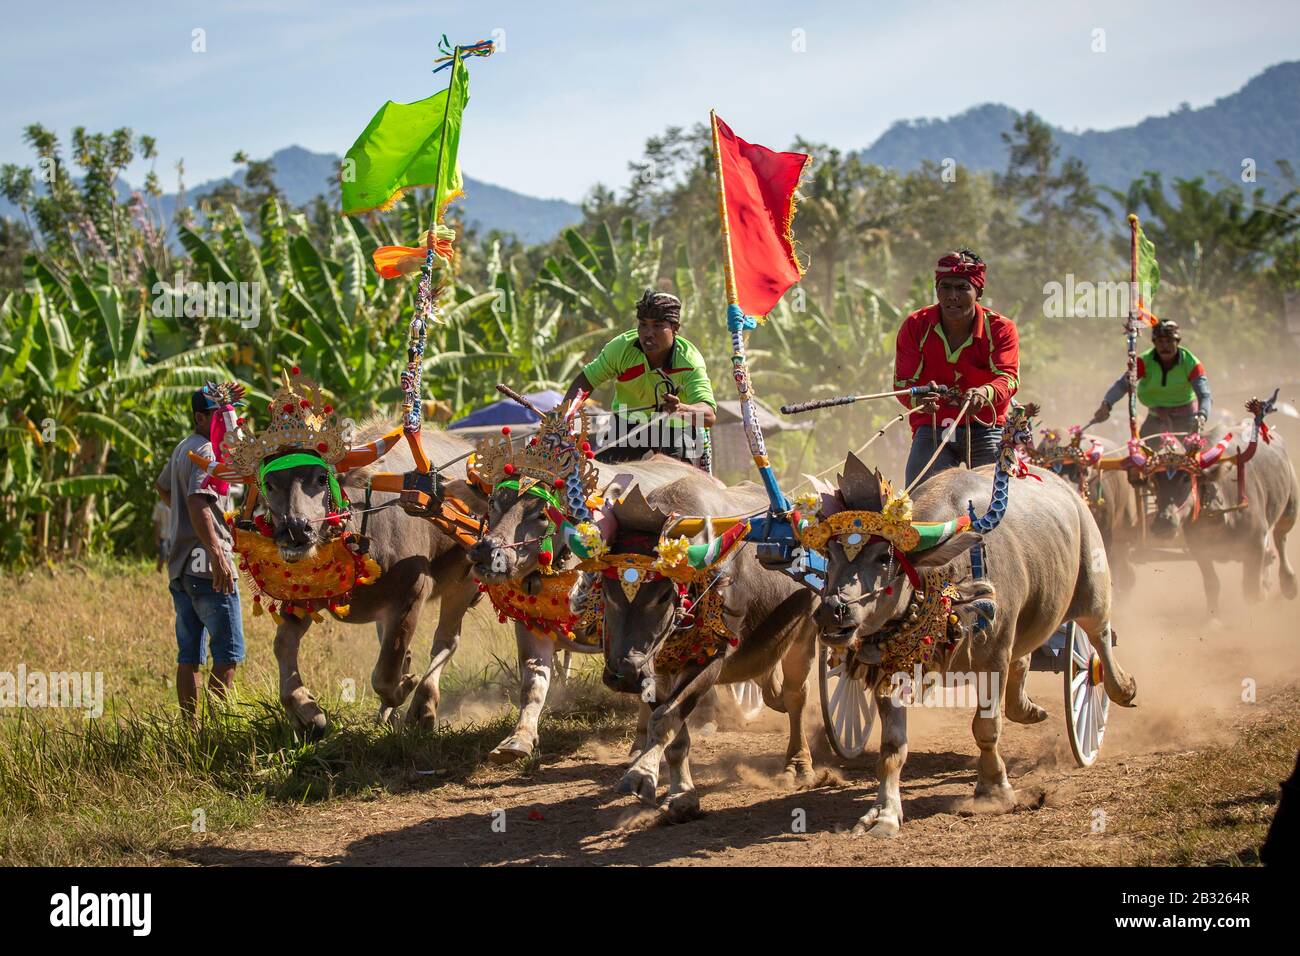 BALI, INDONESIA - SEPTEMBER 11, 2016: Traditional buffalo race known as Makepung held in Negara, Bali, Indonesia on September 11, 2016. Stock Photo